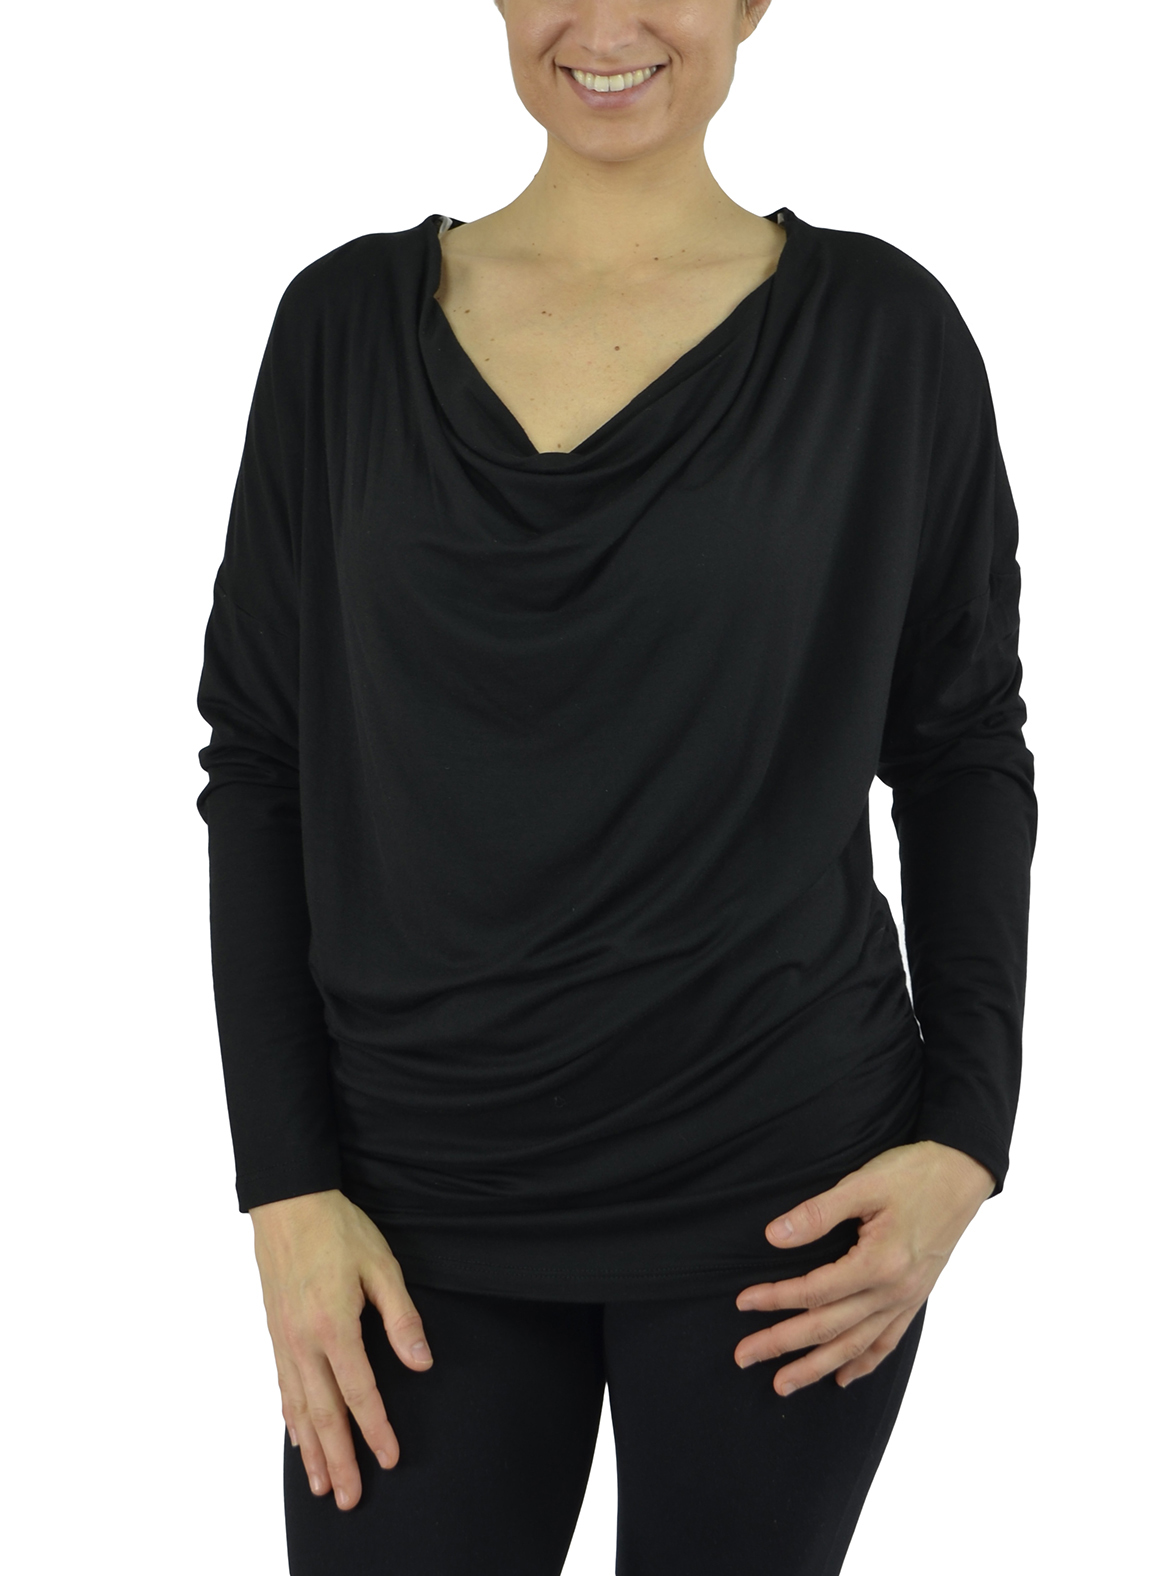 Belle Donne Women Plus Size Tunic Top Loose Jersey Style Casual Blouse - Black-III Small